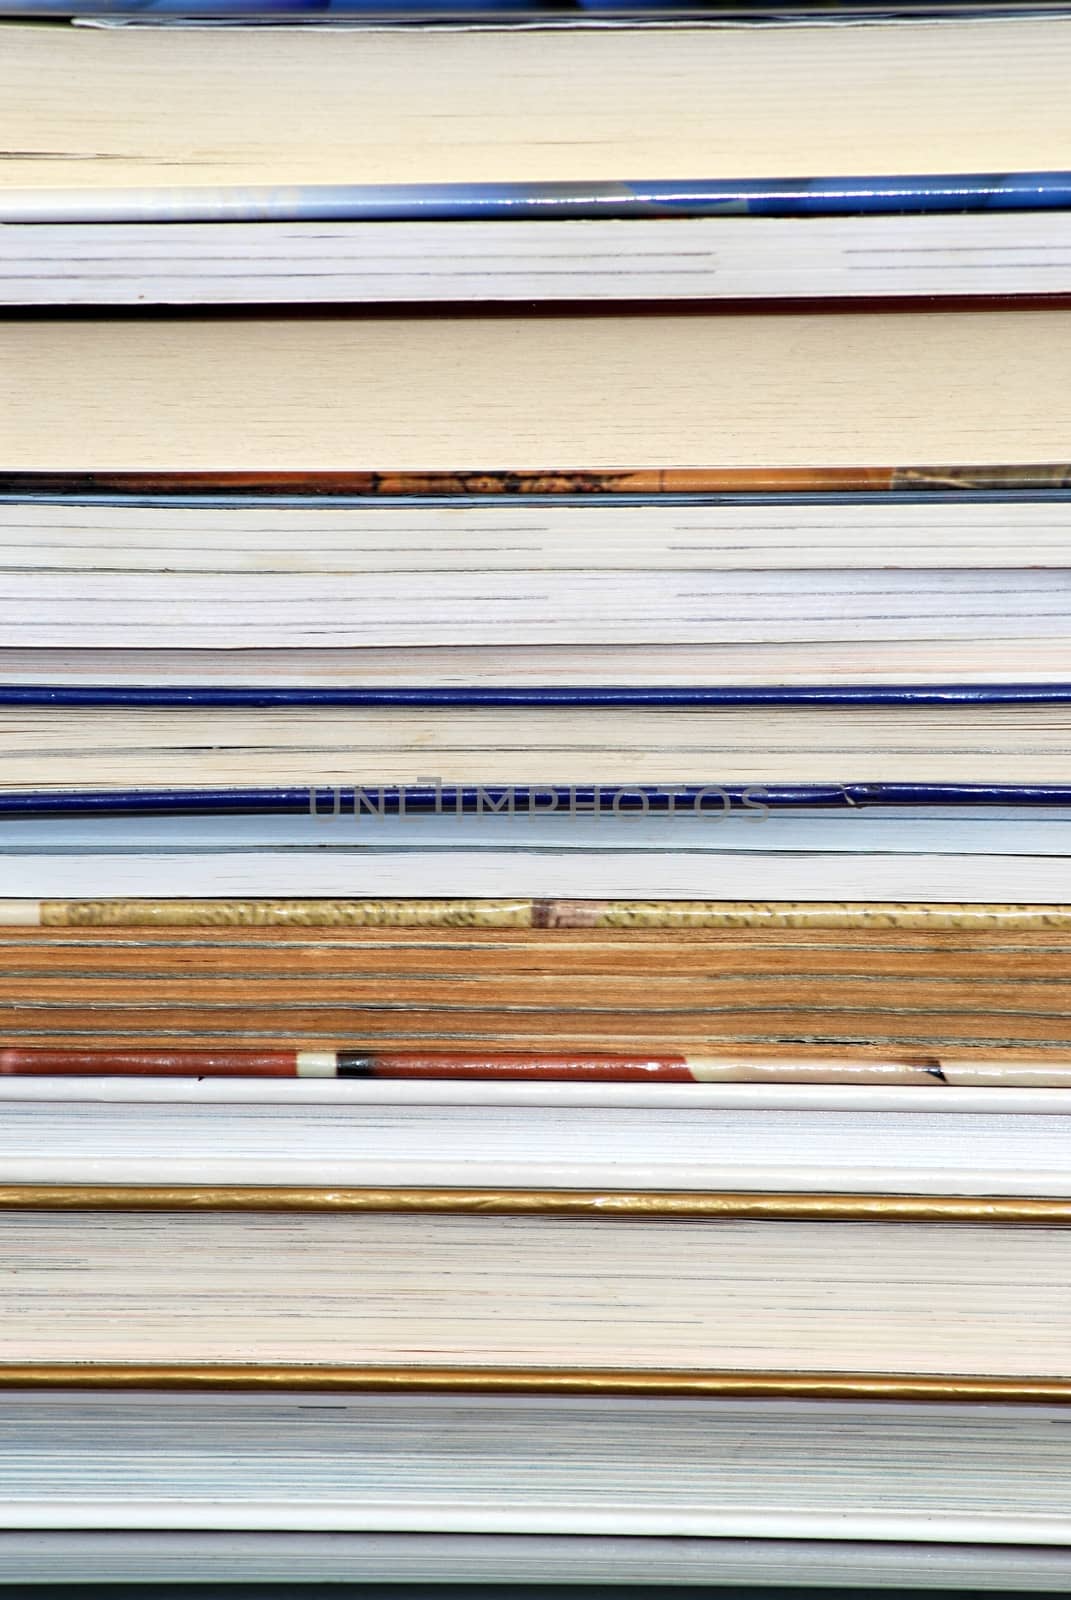 Detail image of stack of books.